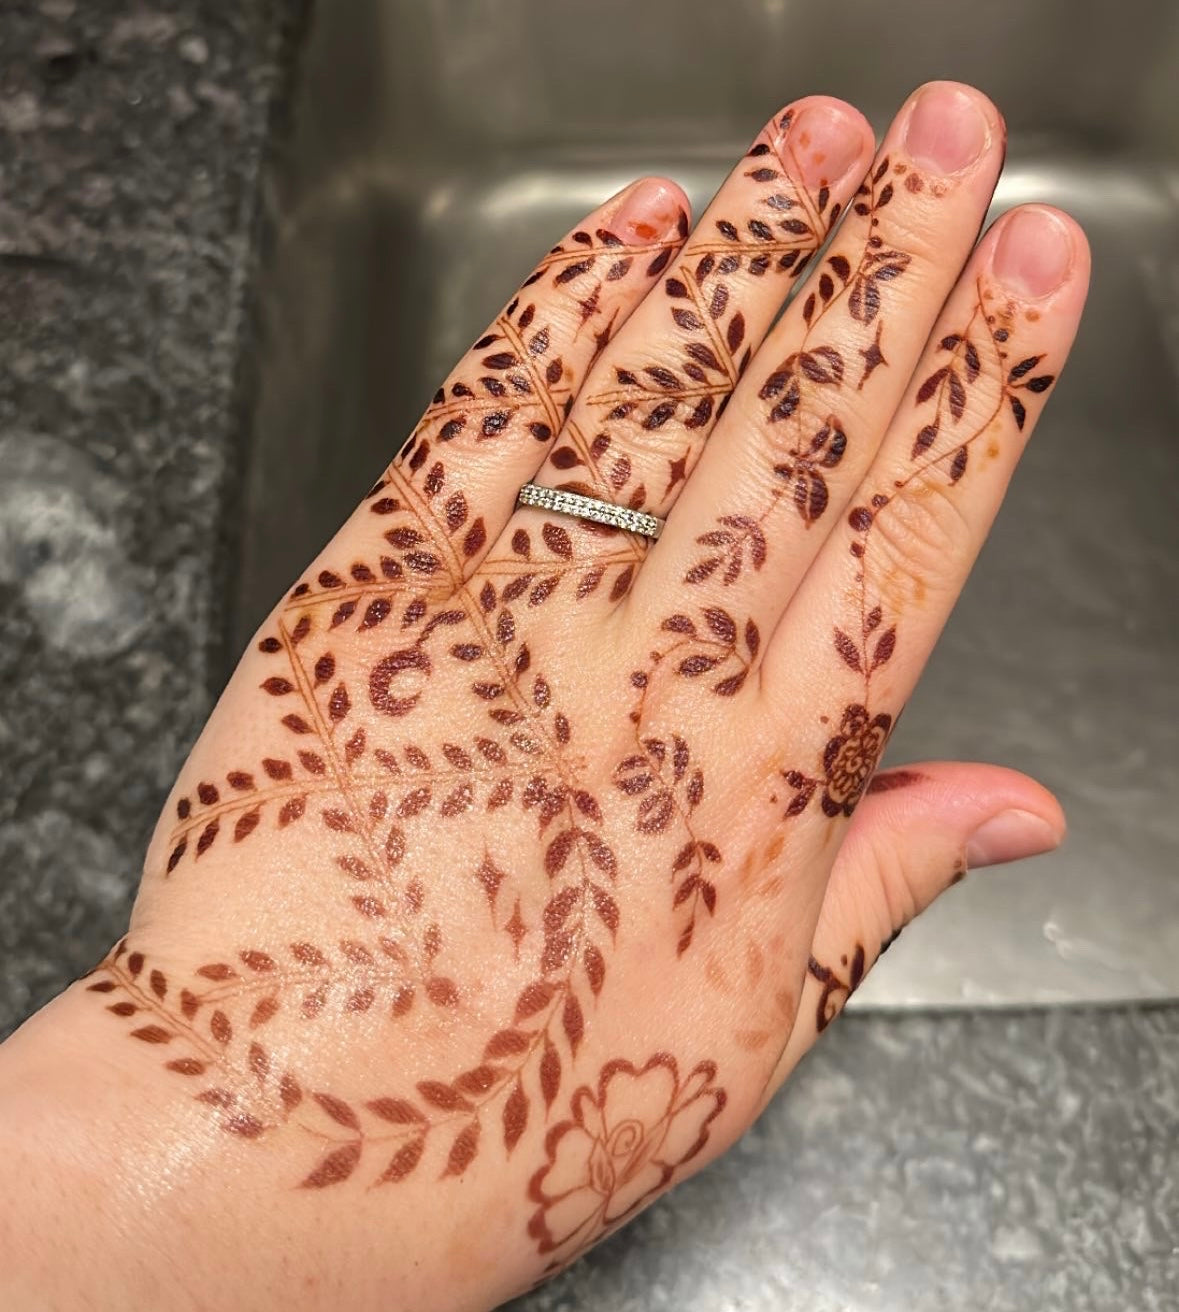 All About Henna (Part 2) - Henna Traditions and Its Other Uses